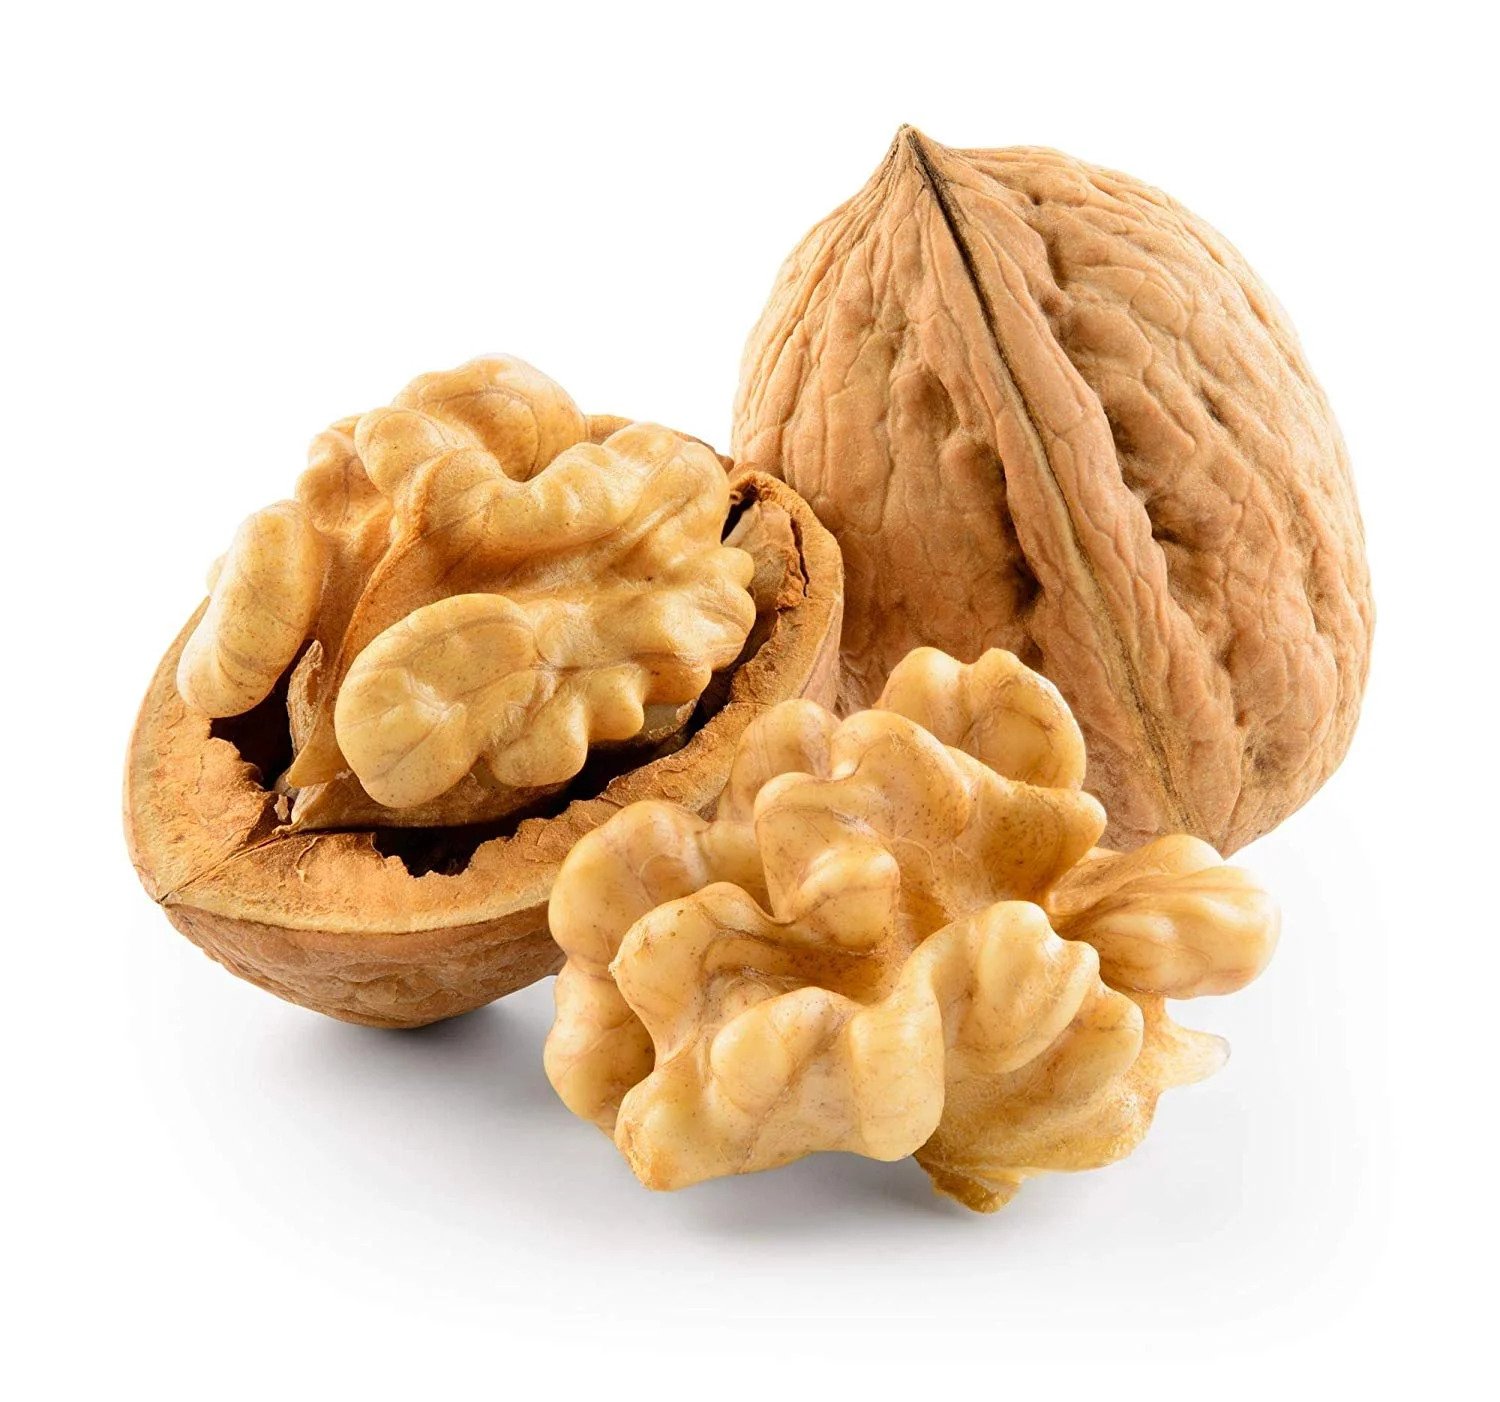 How To Store Unshelled Walnuts